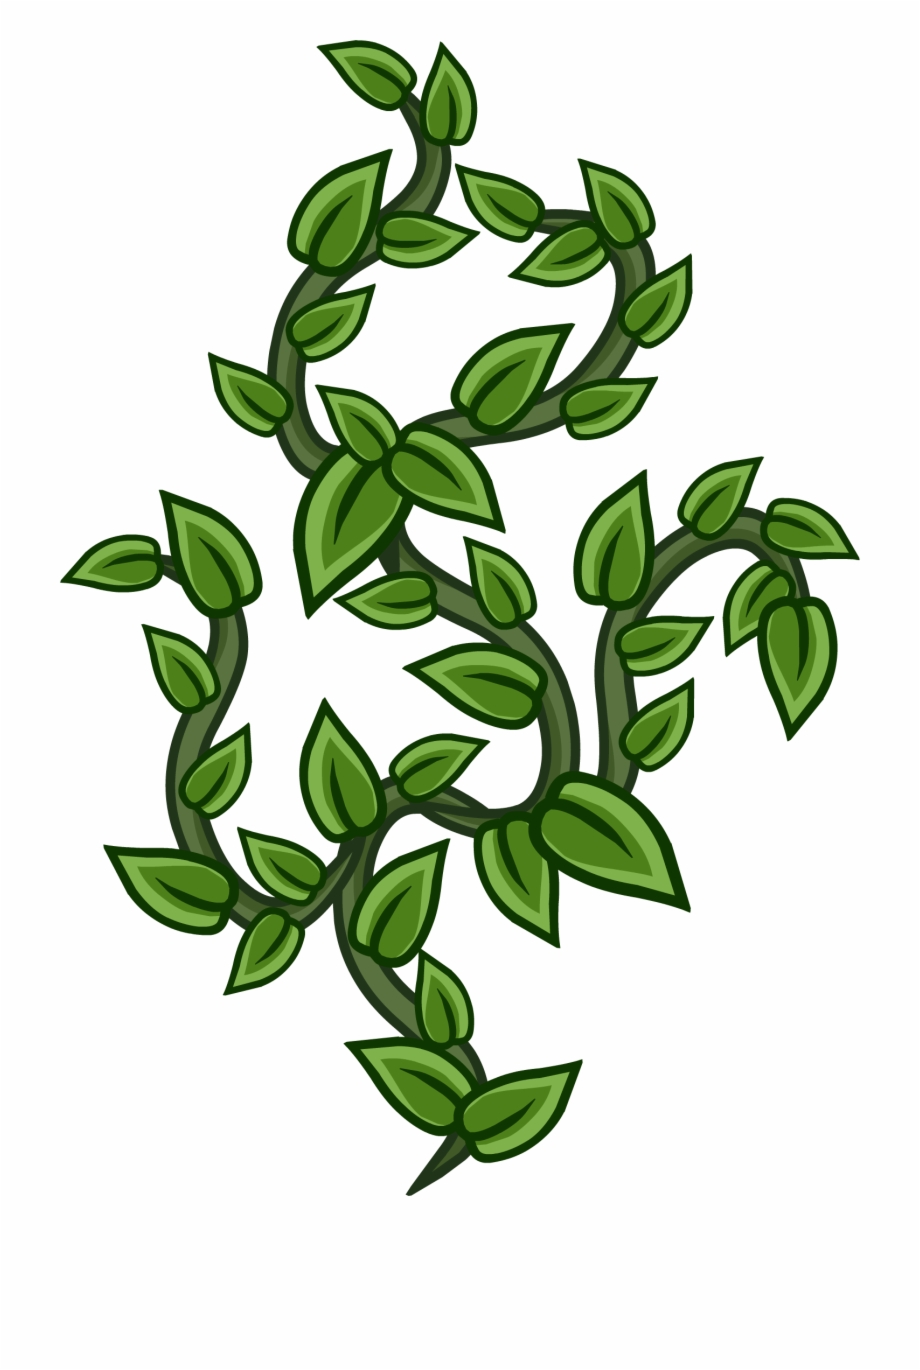 vines clipart wall